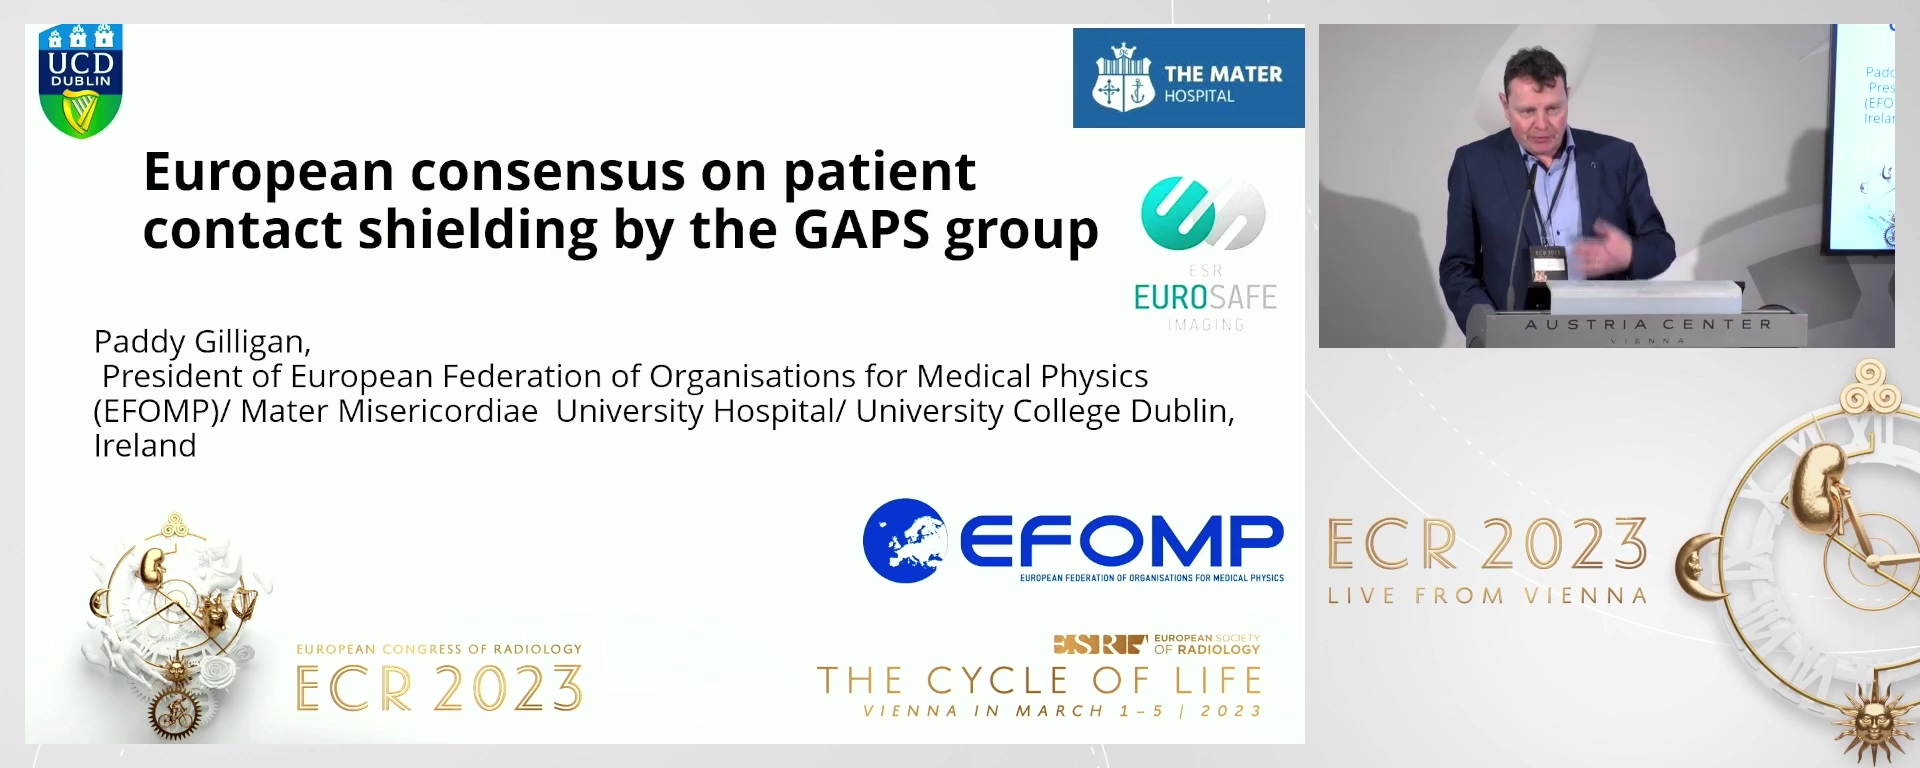 European consensus on patient contact shielding by the GAPS group